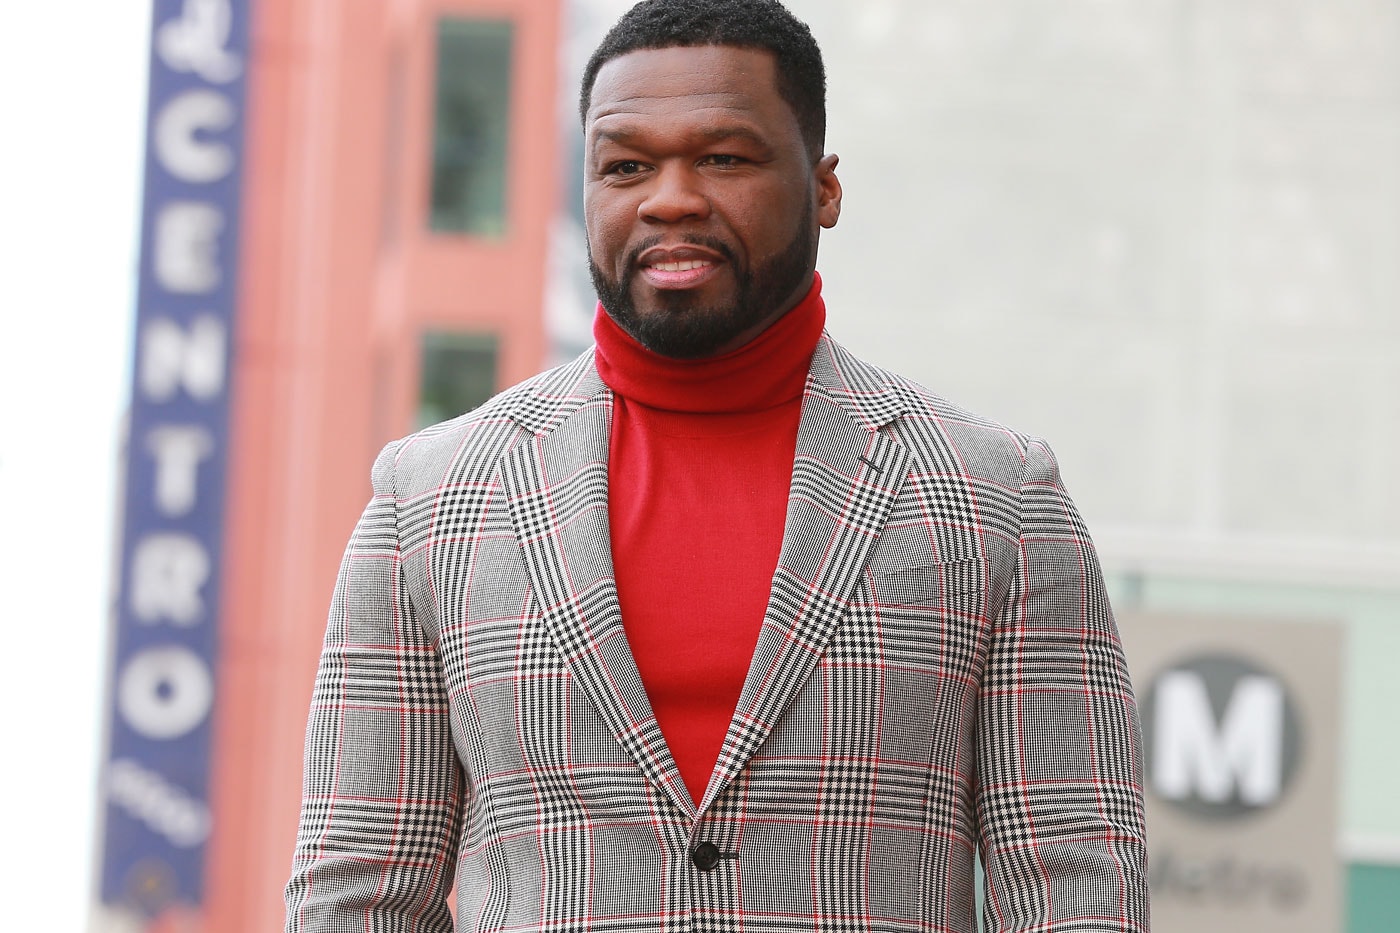 50 Cent Reveals That His Next Album Could Be His Last  top 10 rappers in the game dead or alive kanan tape hip hop fif starz branson cognac